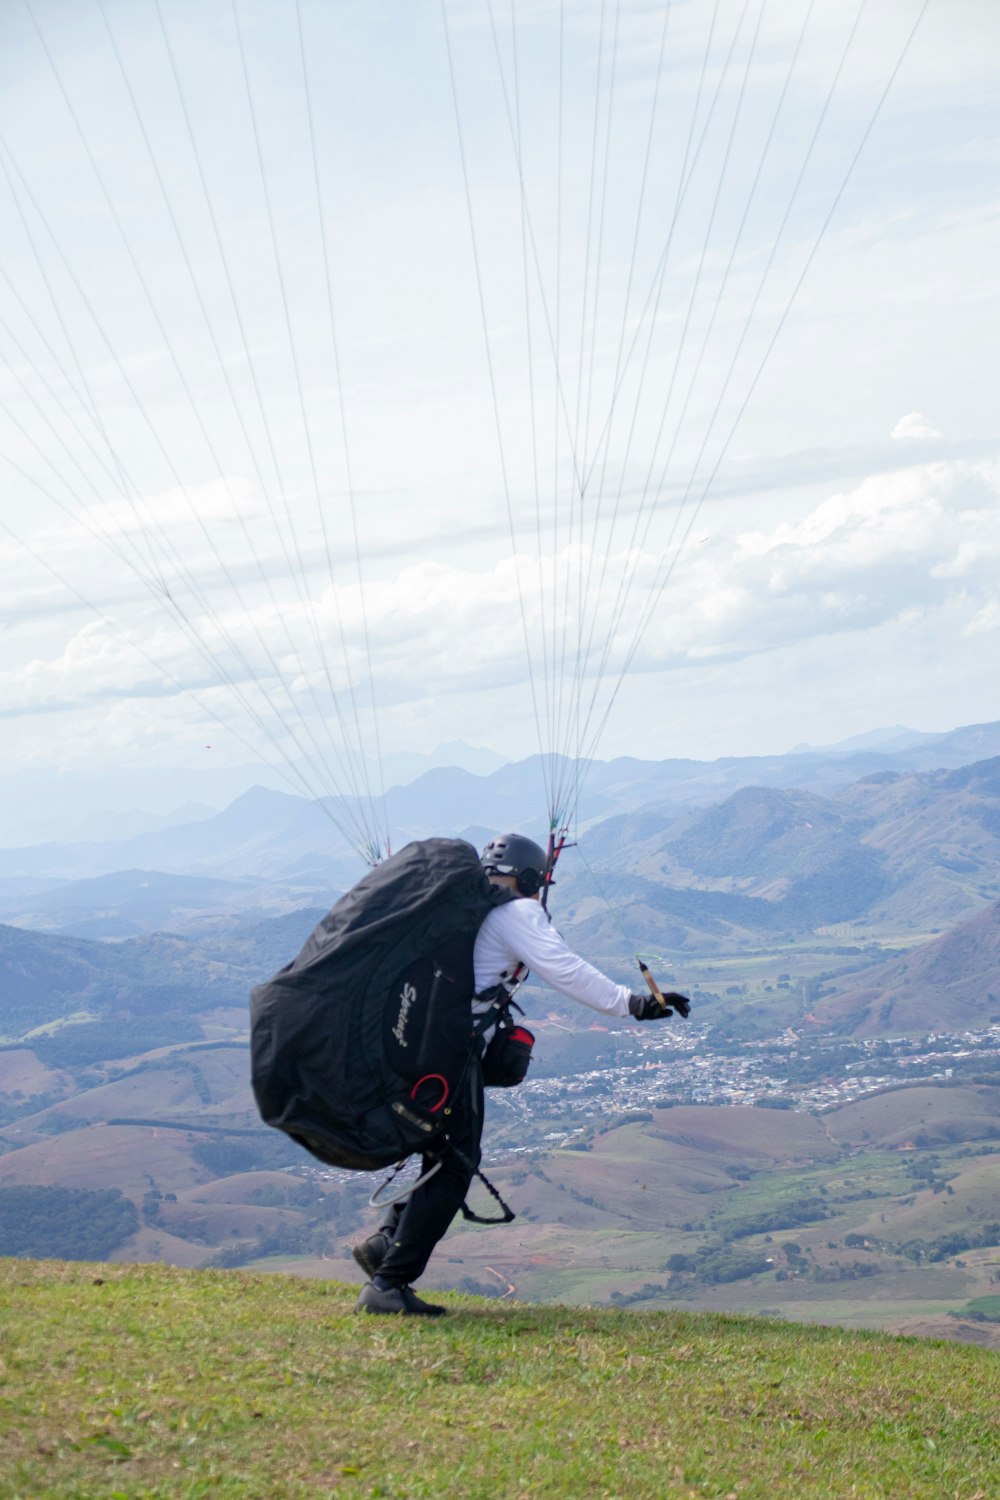 a person with a backpack and parachute on a hill